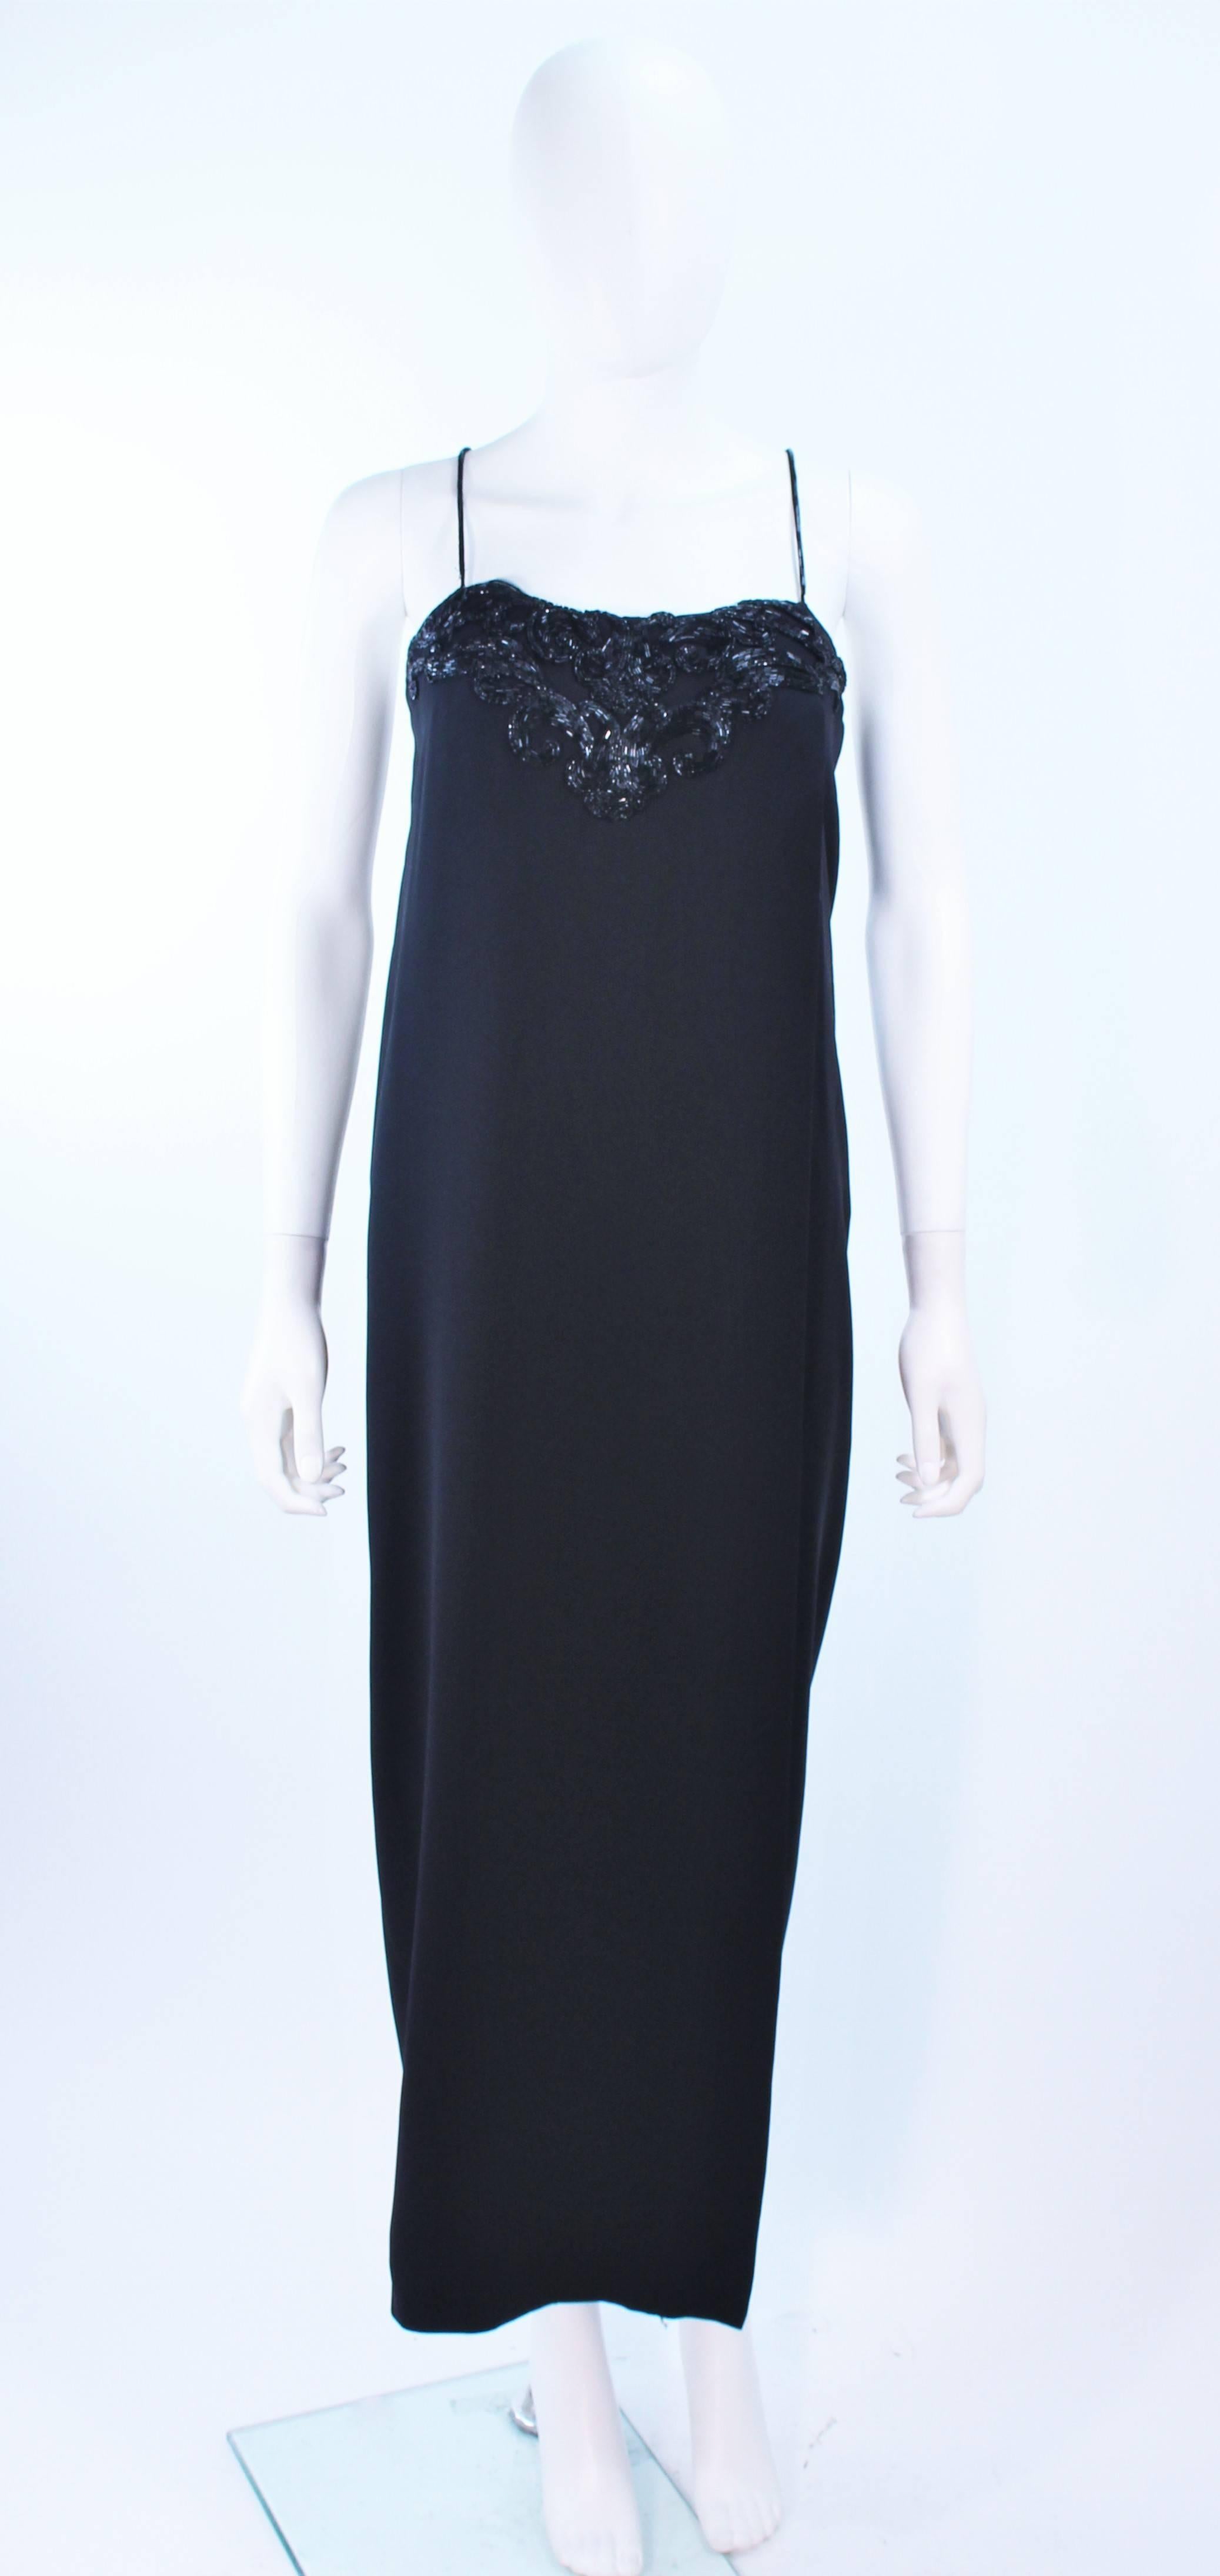 This Stavropoulos gown is composed of a black silk chiffon and features a beaded bust with straps. There is a center back zipper closure. In great vintage condition, there a few missing beads, overall good condition.

**Please cross-reference